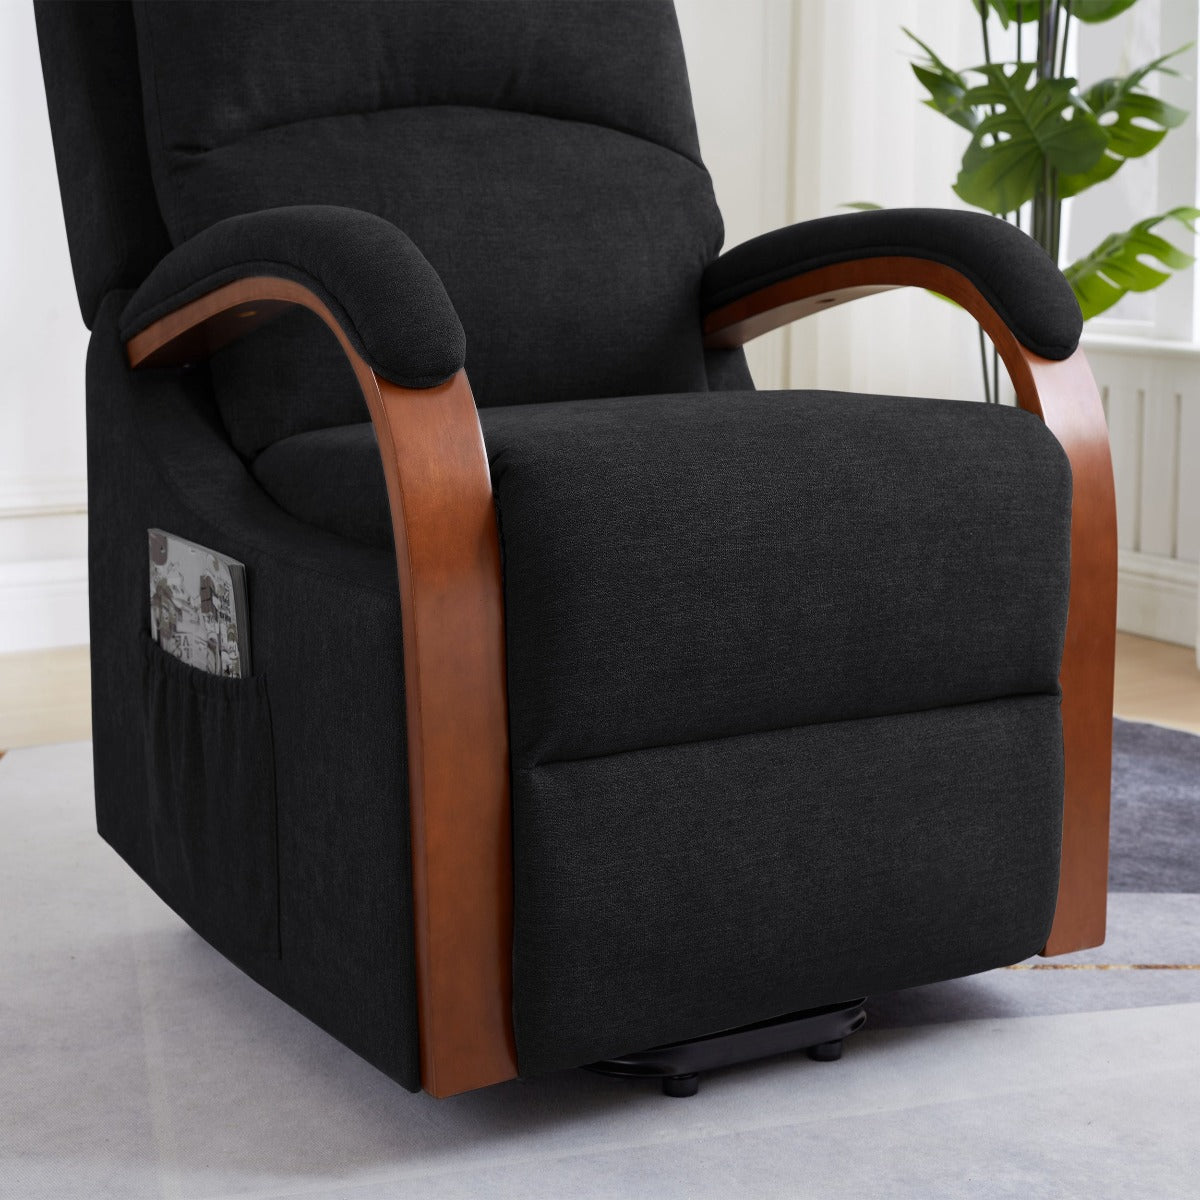 Power Lift Recliner Message Chair Soft Charcoal colored Fabric close up view